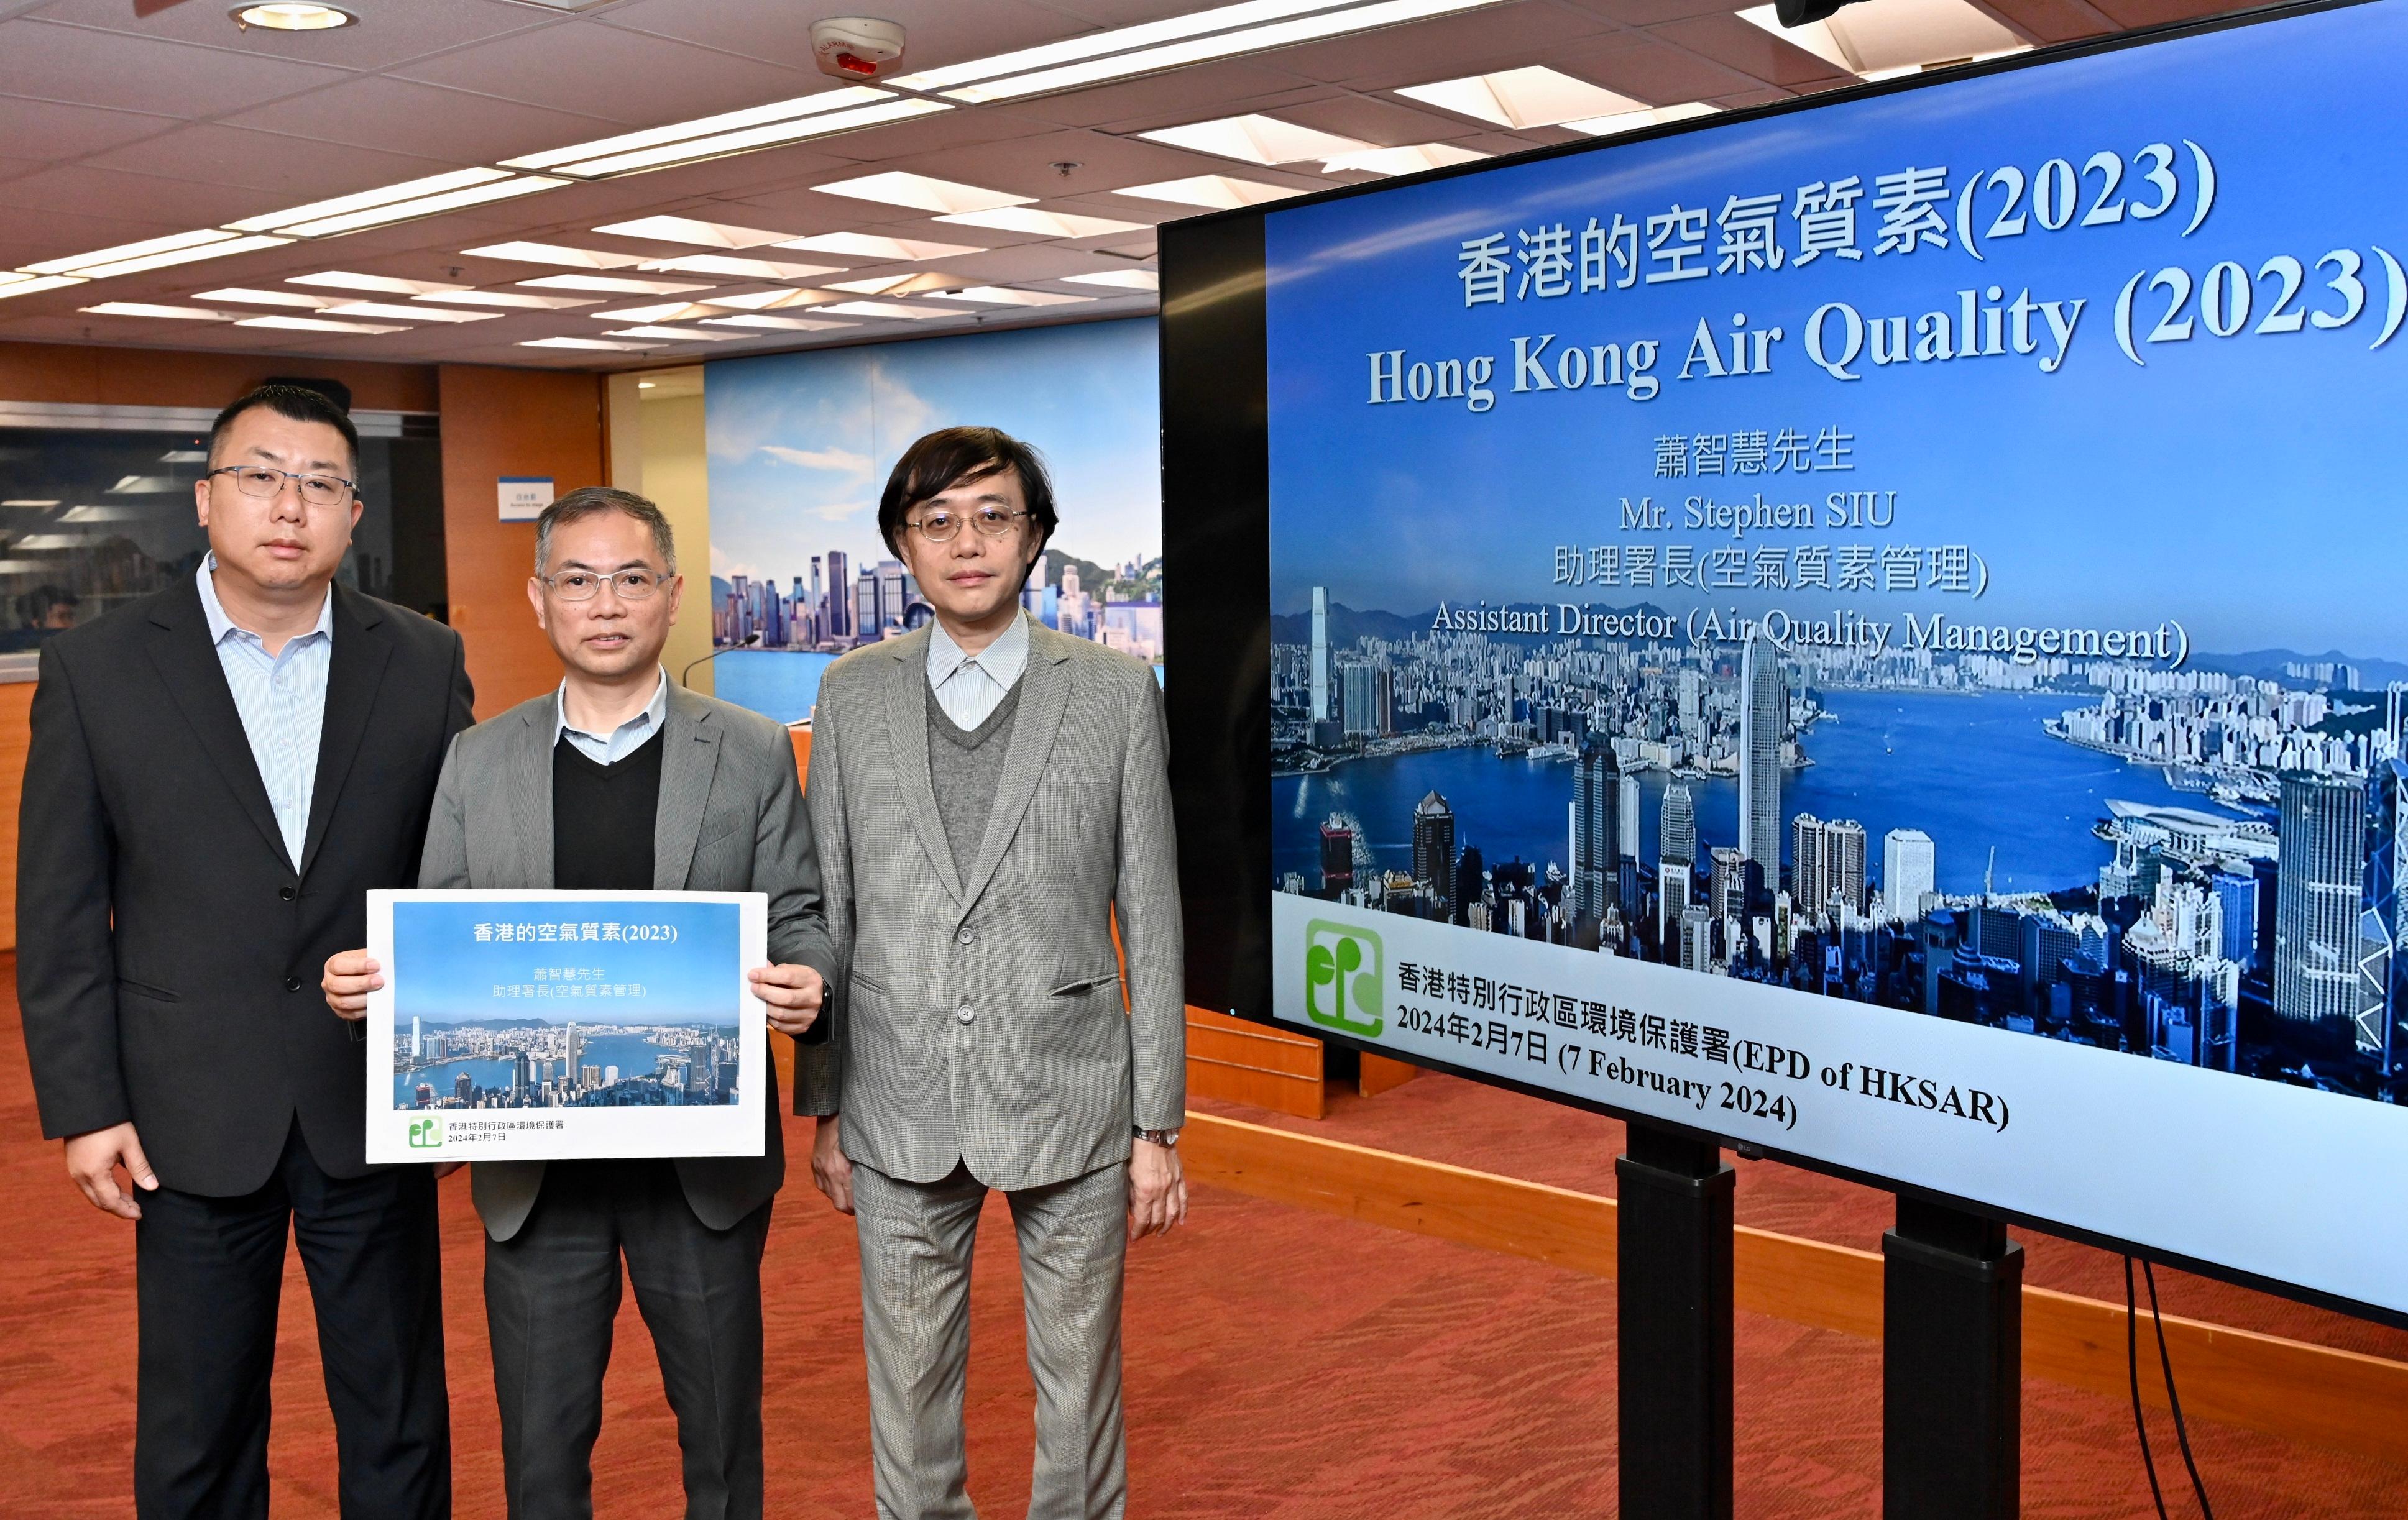 The Environmental Protection Department (EPD) announced today (February 7) an overview of Hong Kong's air quality in 2023. The overall improvement trend of Hong Kong's air quality remains unchanged. The Assistant Director of Environmental Protection (Air Quality Management), Mr Stephen Siu (centre); the Principal Environmental Protection Officer (Air Science and Modelling) of the EPD, Mr Eddie Lee (left); and Senior Environmental Protection Officer (Air Science and Modelling) of the EPD Mr Tony Lee (right), are pictured before the press briefing.